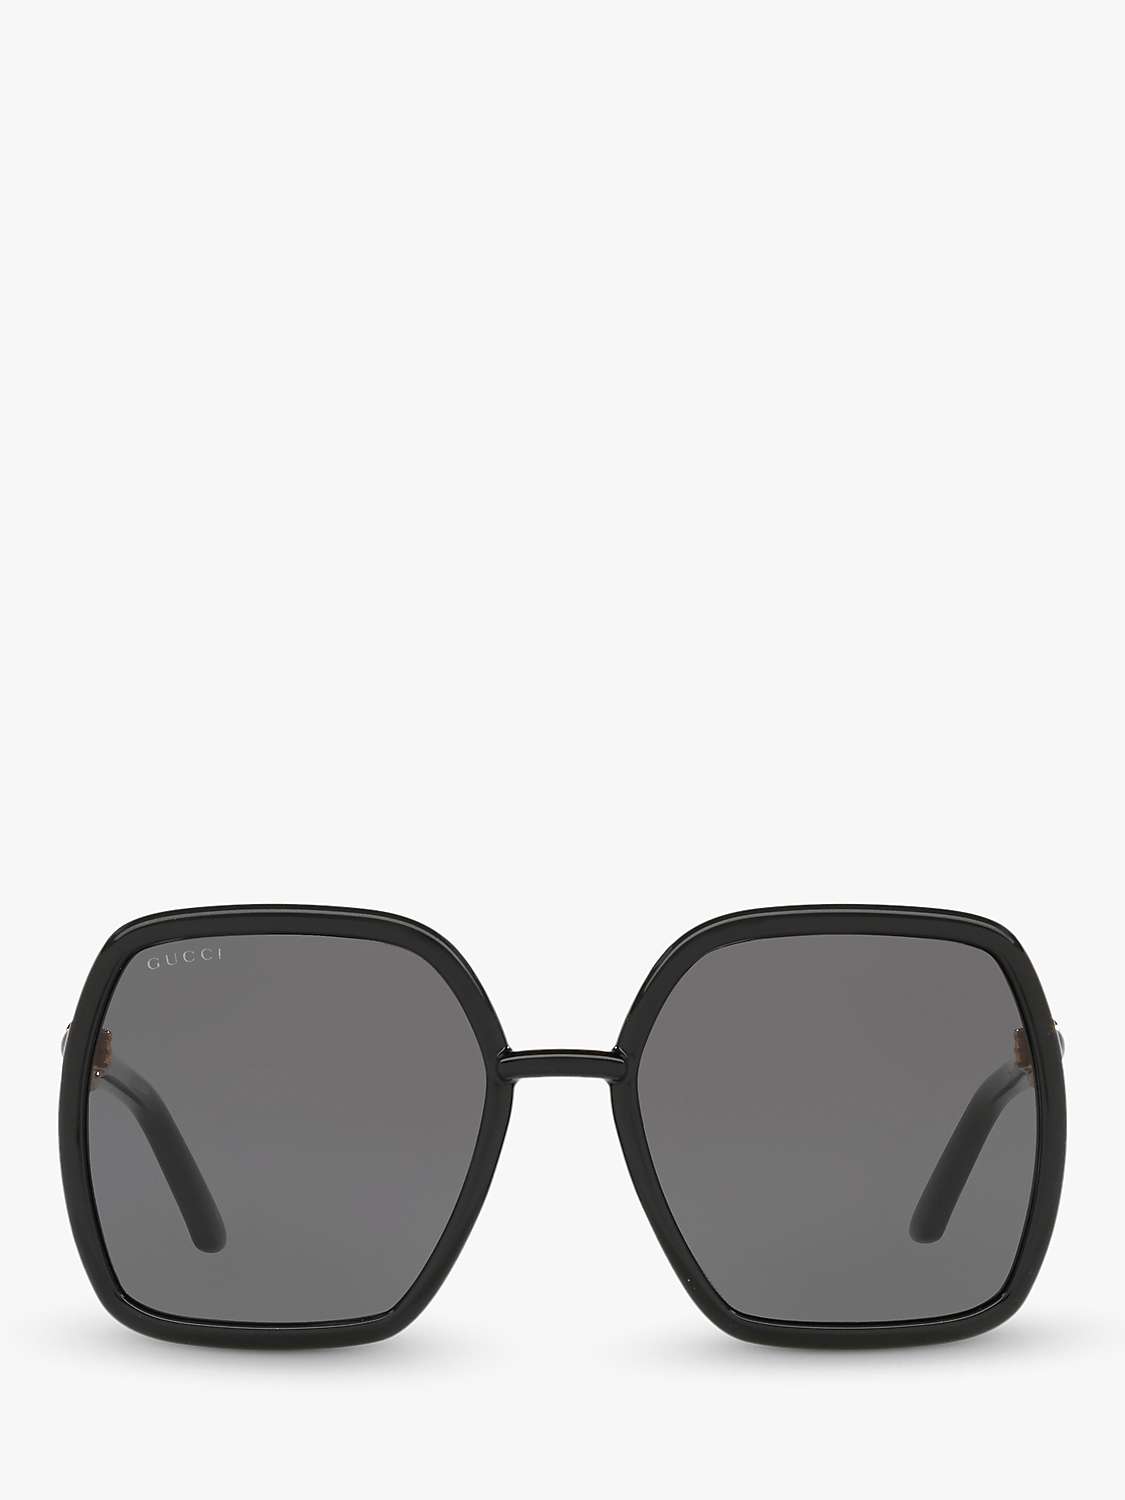 Buy Gucci GG0890S Women's Square Sunglasses Online at johnlewis.com